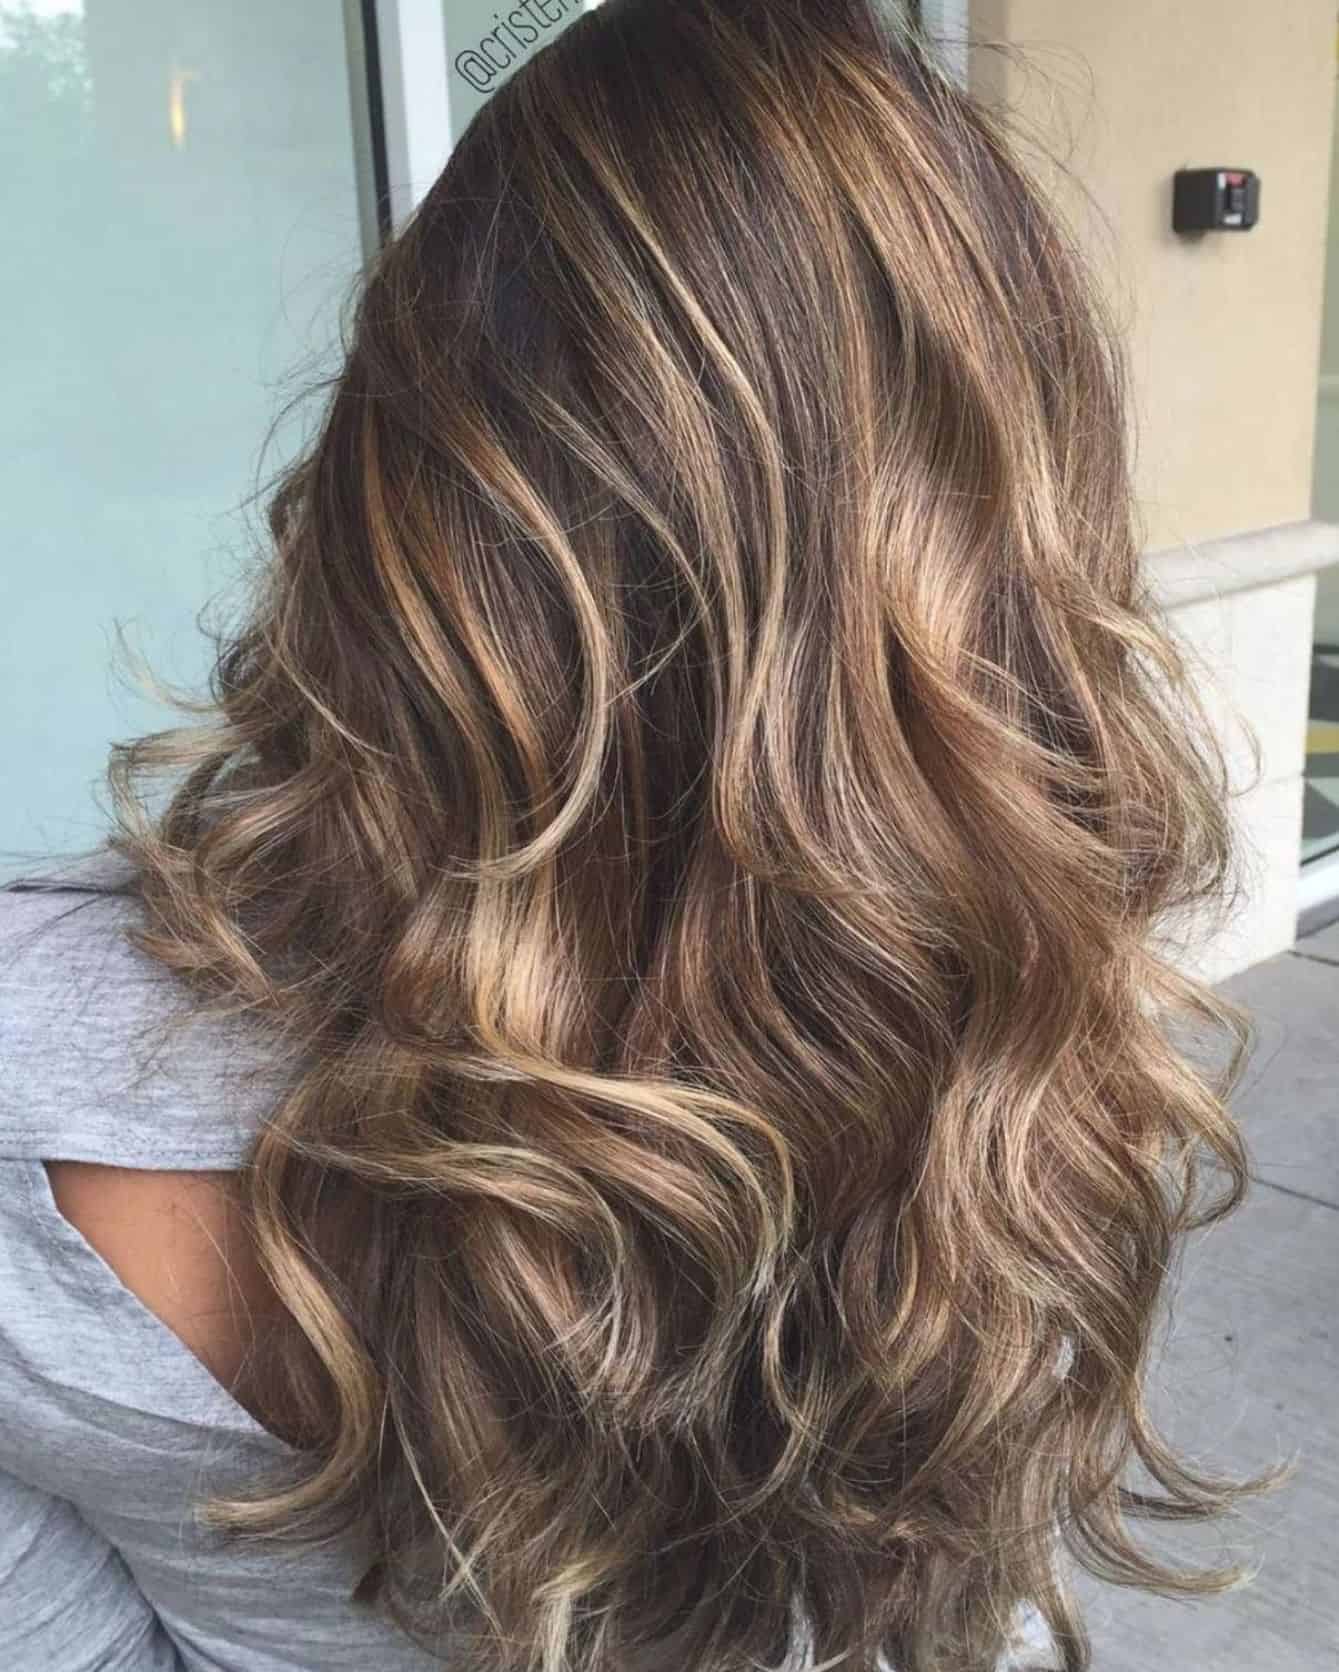 Long chocolate hair with subtle highlights